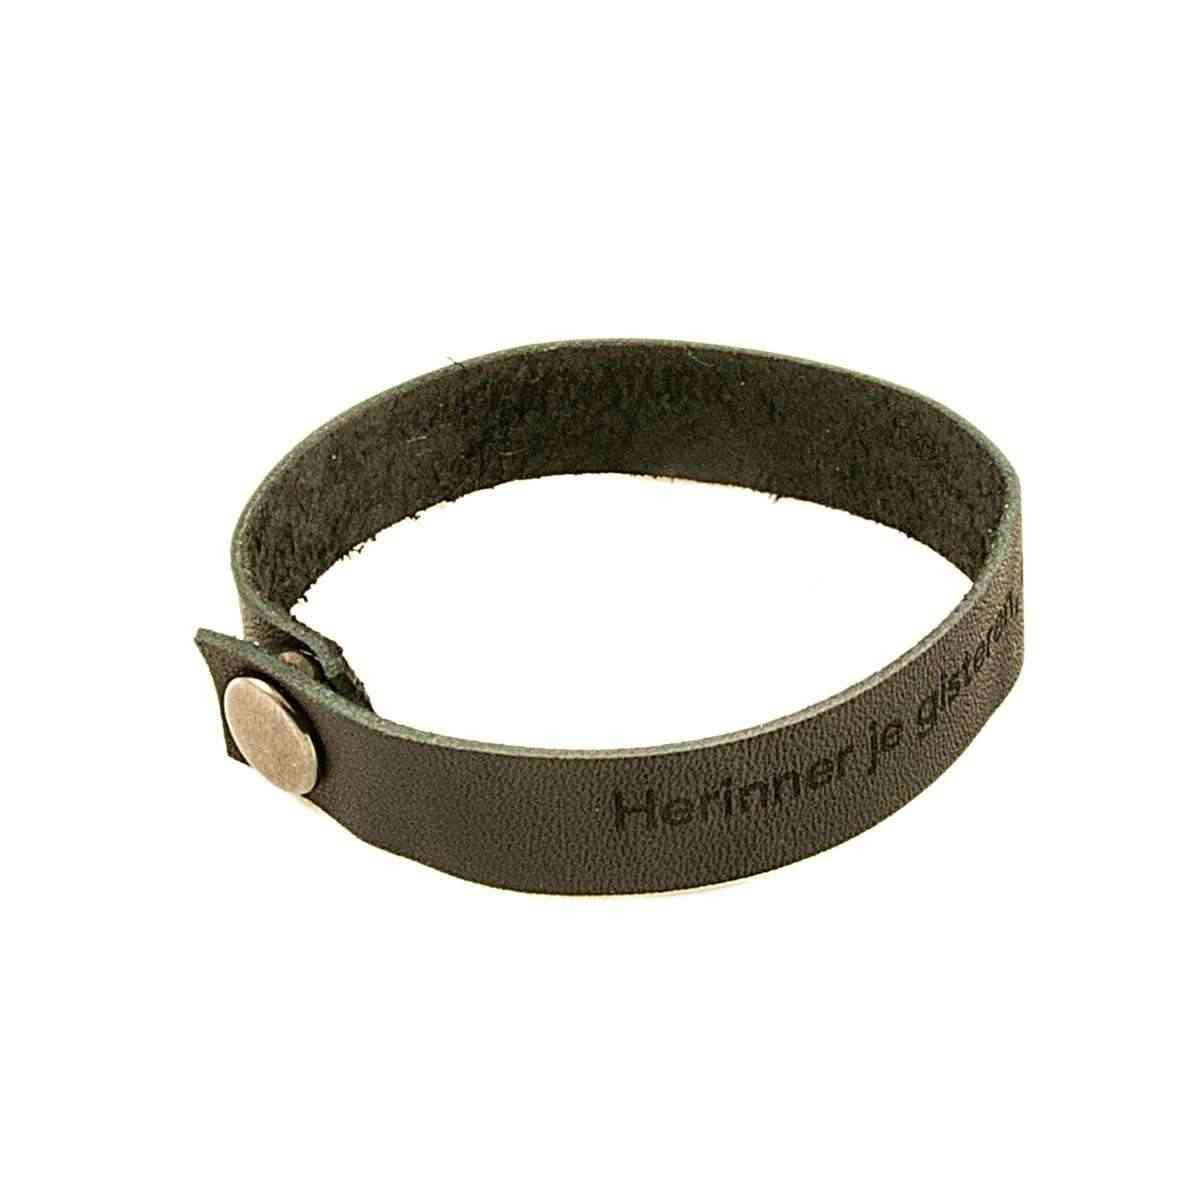 Engraved leather bracelet with buttons. Single wrap.